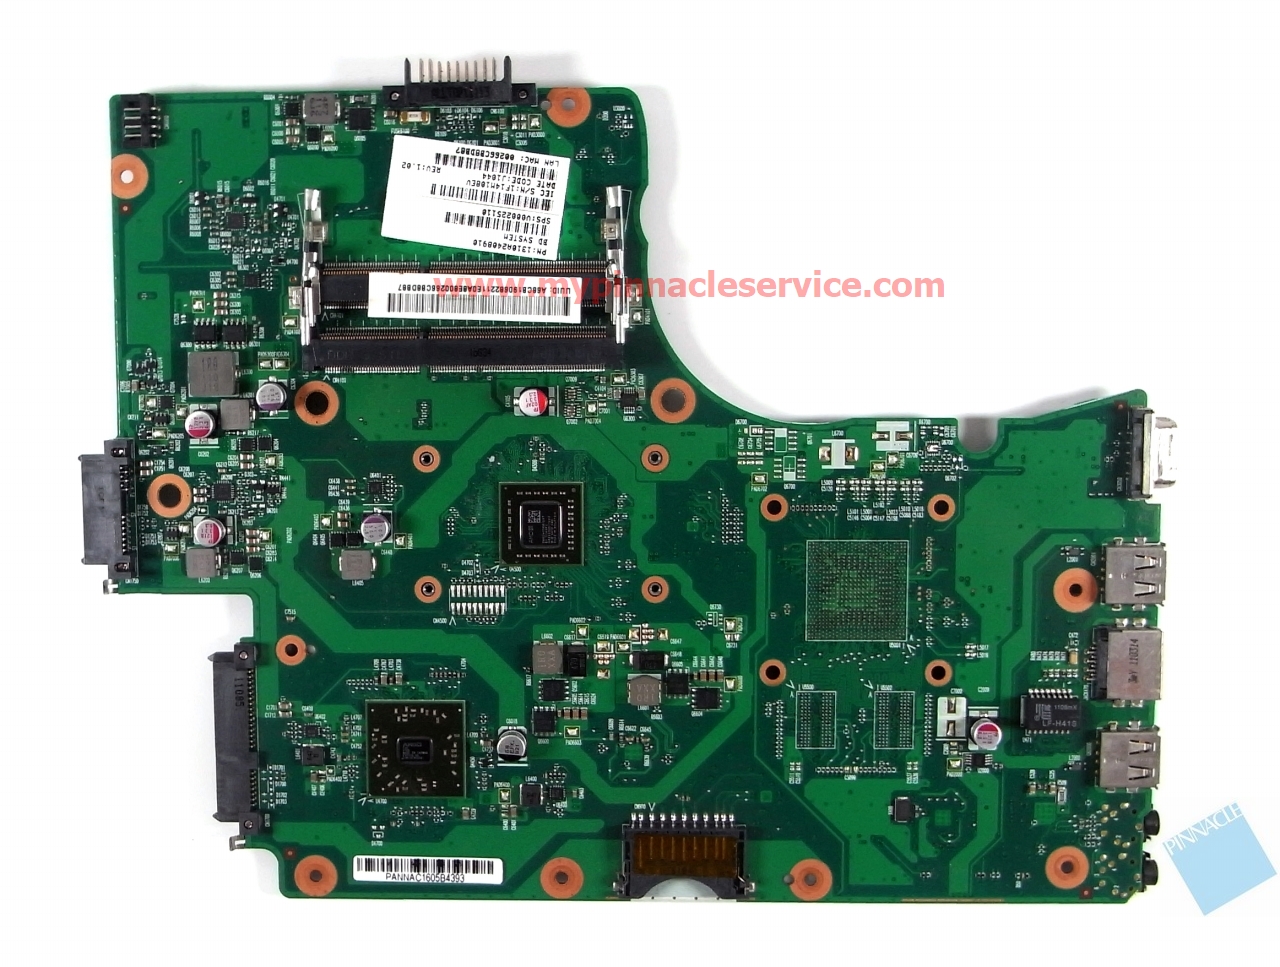 v000225110-motherboard-for-toshiba-satellite-c650d-c655d-6050a2408901-1310a2408910-r0011319.jpg